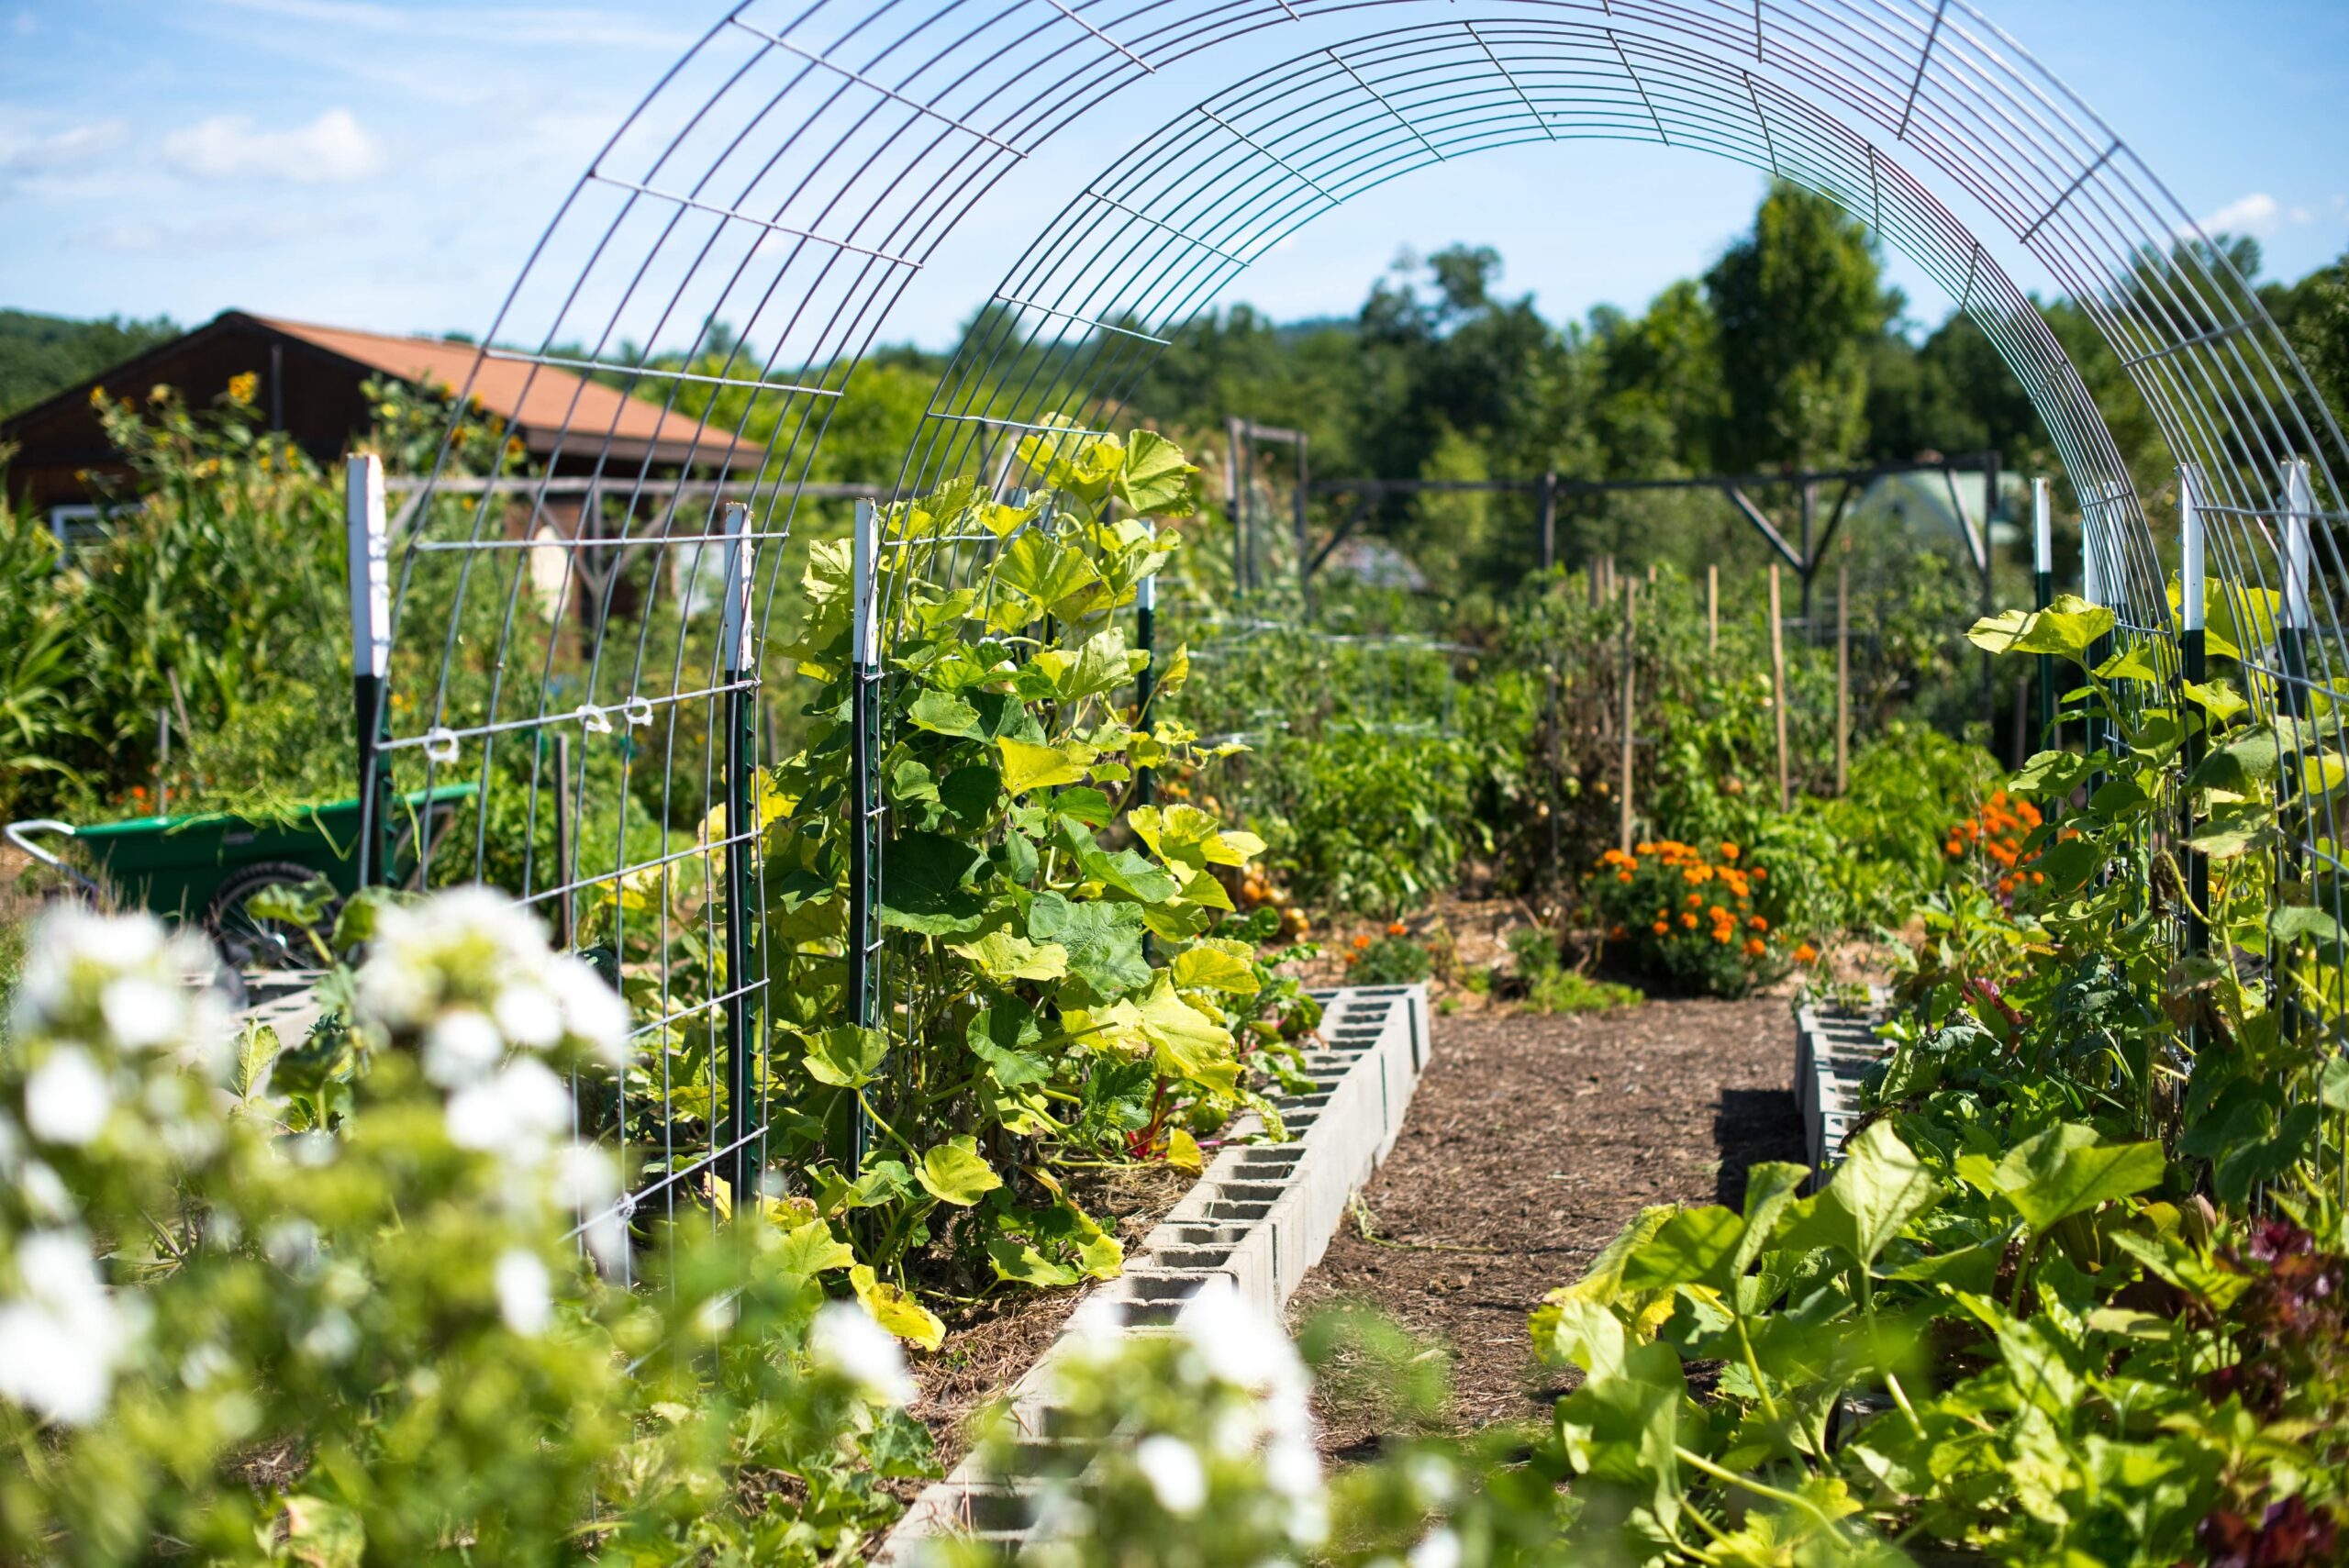 A lush summer garden. Two arched trellises have plants beginning to creep up. Cinder blocks line bed that are filling with growing plants. The background flowers grow. what to plant in may